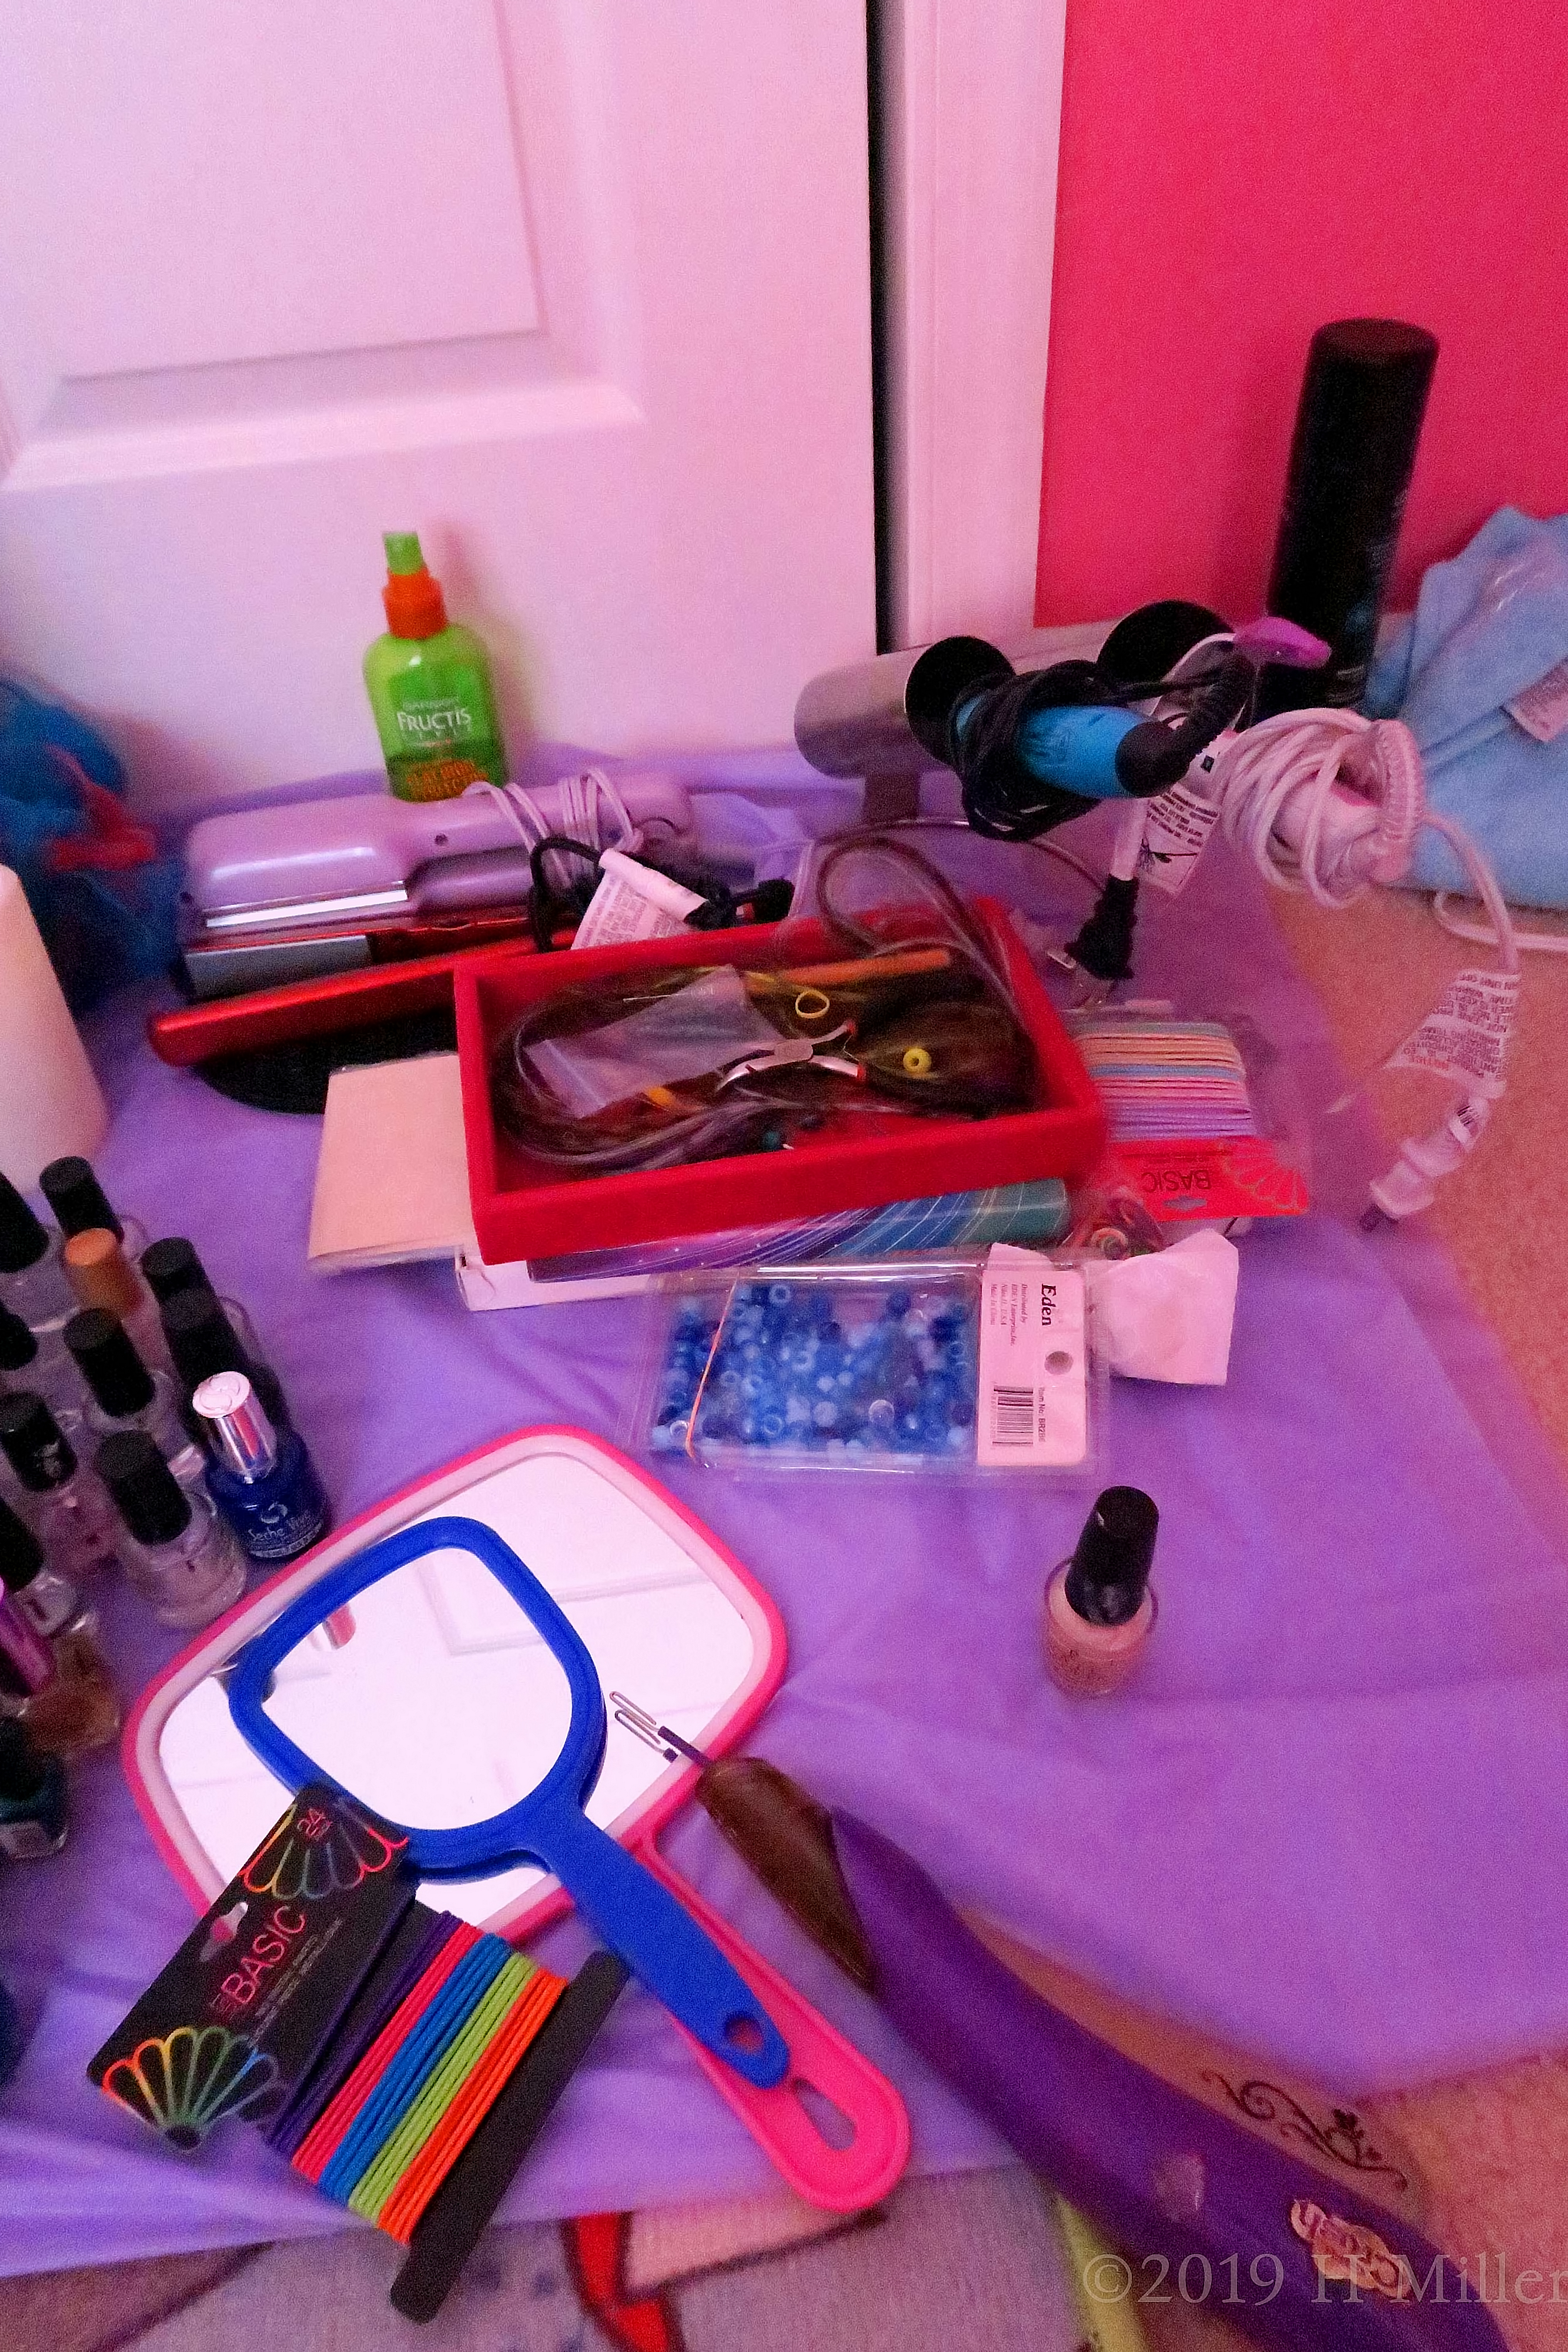 Mirror, Nail Polish, Curling Irons! A Perfect Set Up For The Kids Hair Salon 